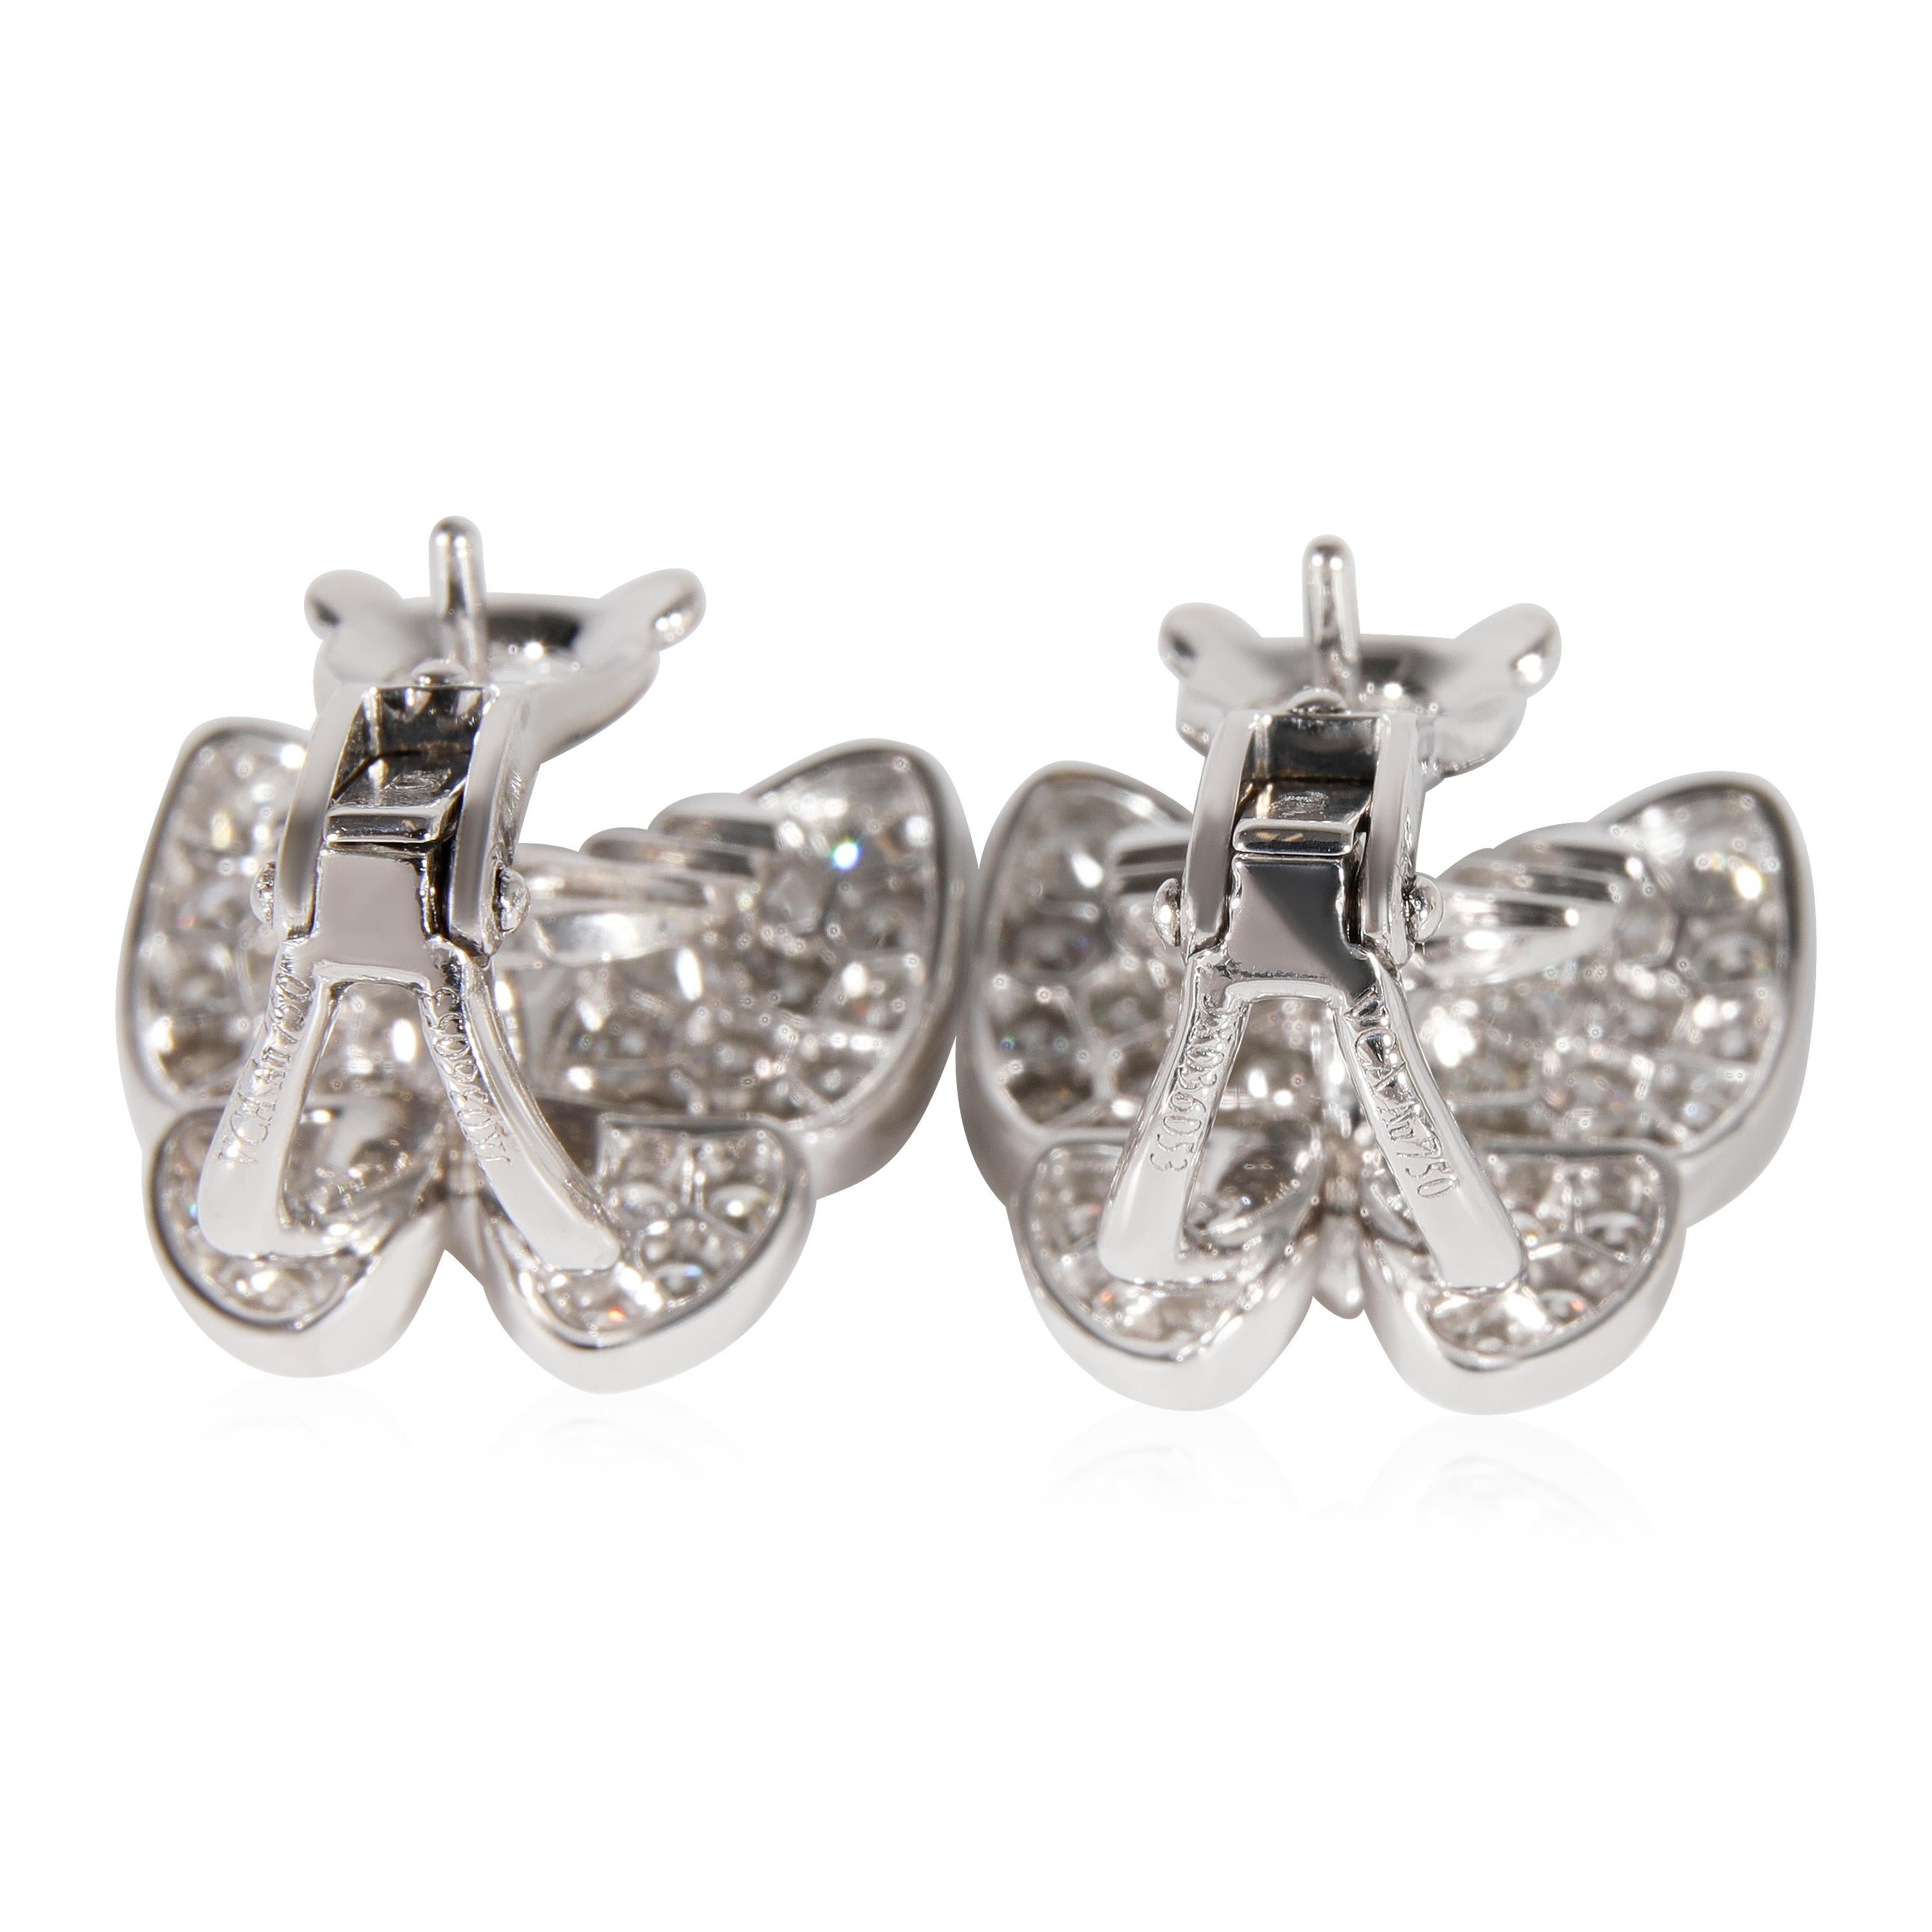 Van Cleef & Arpels Two Butterfly Diamond Earrings in 18k White Gold 1.67 CTW

PRIMARY DETAILS
SKU: 121848
Listing Title: Van Cleef & Arpels Two Butterfly Diamond Earrings in 18k White Gold 1.67 CTW
Condition Description: Retails for 27900 USD. In